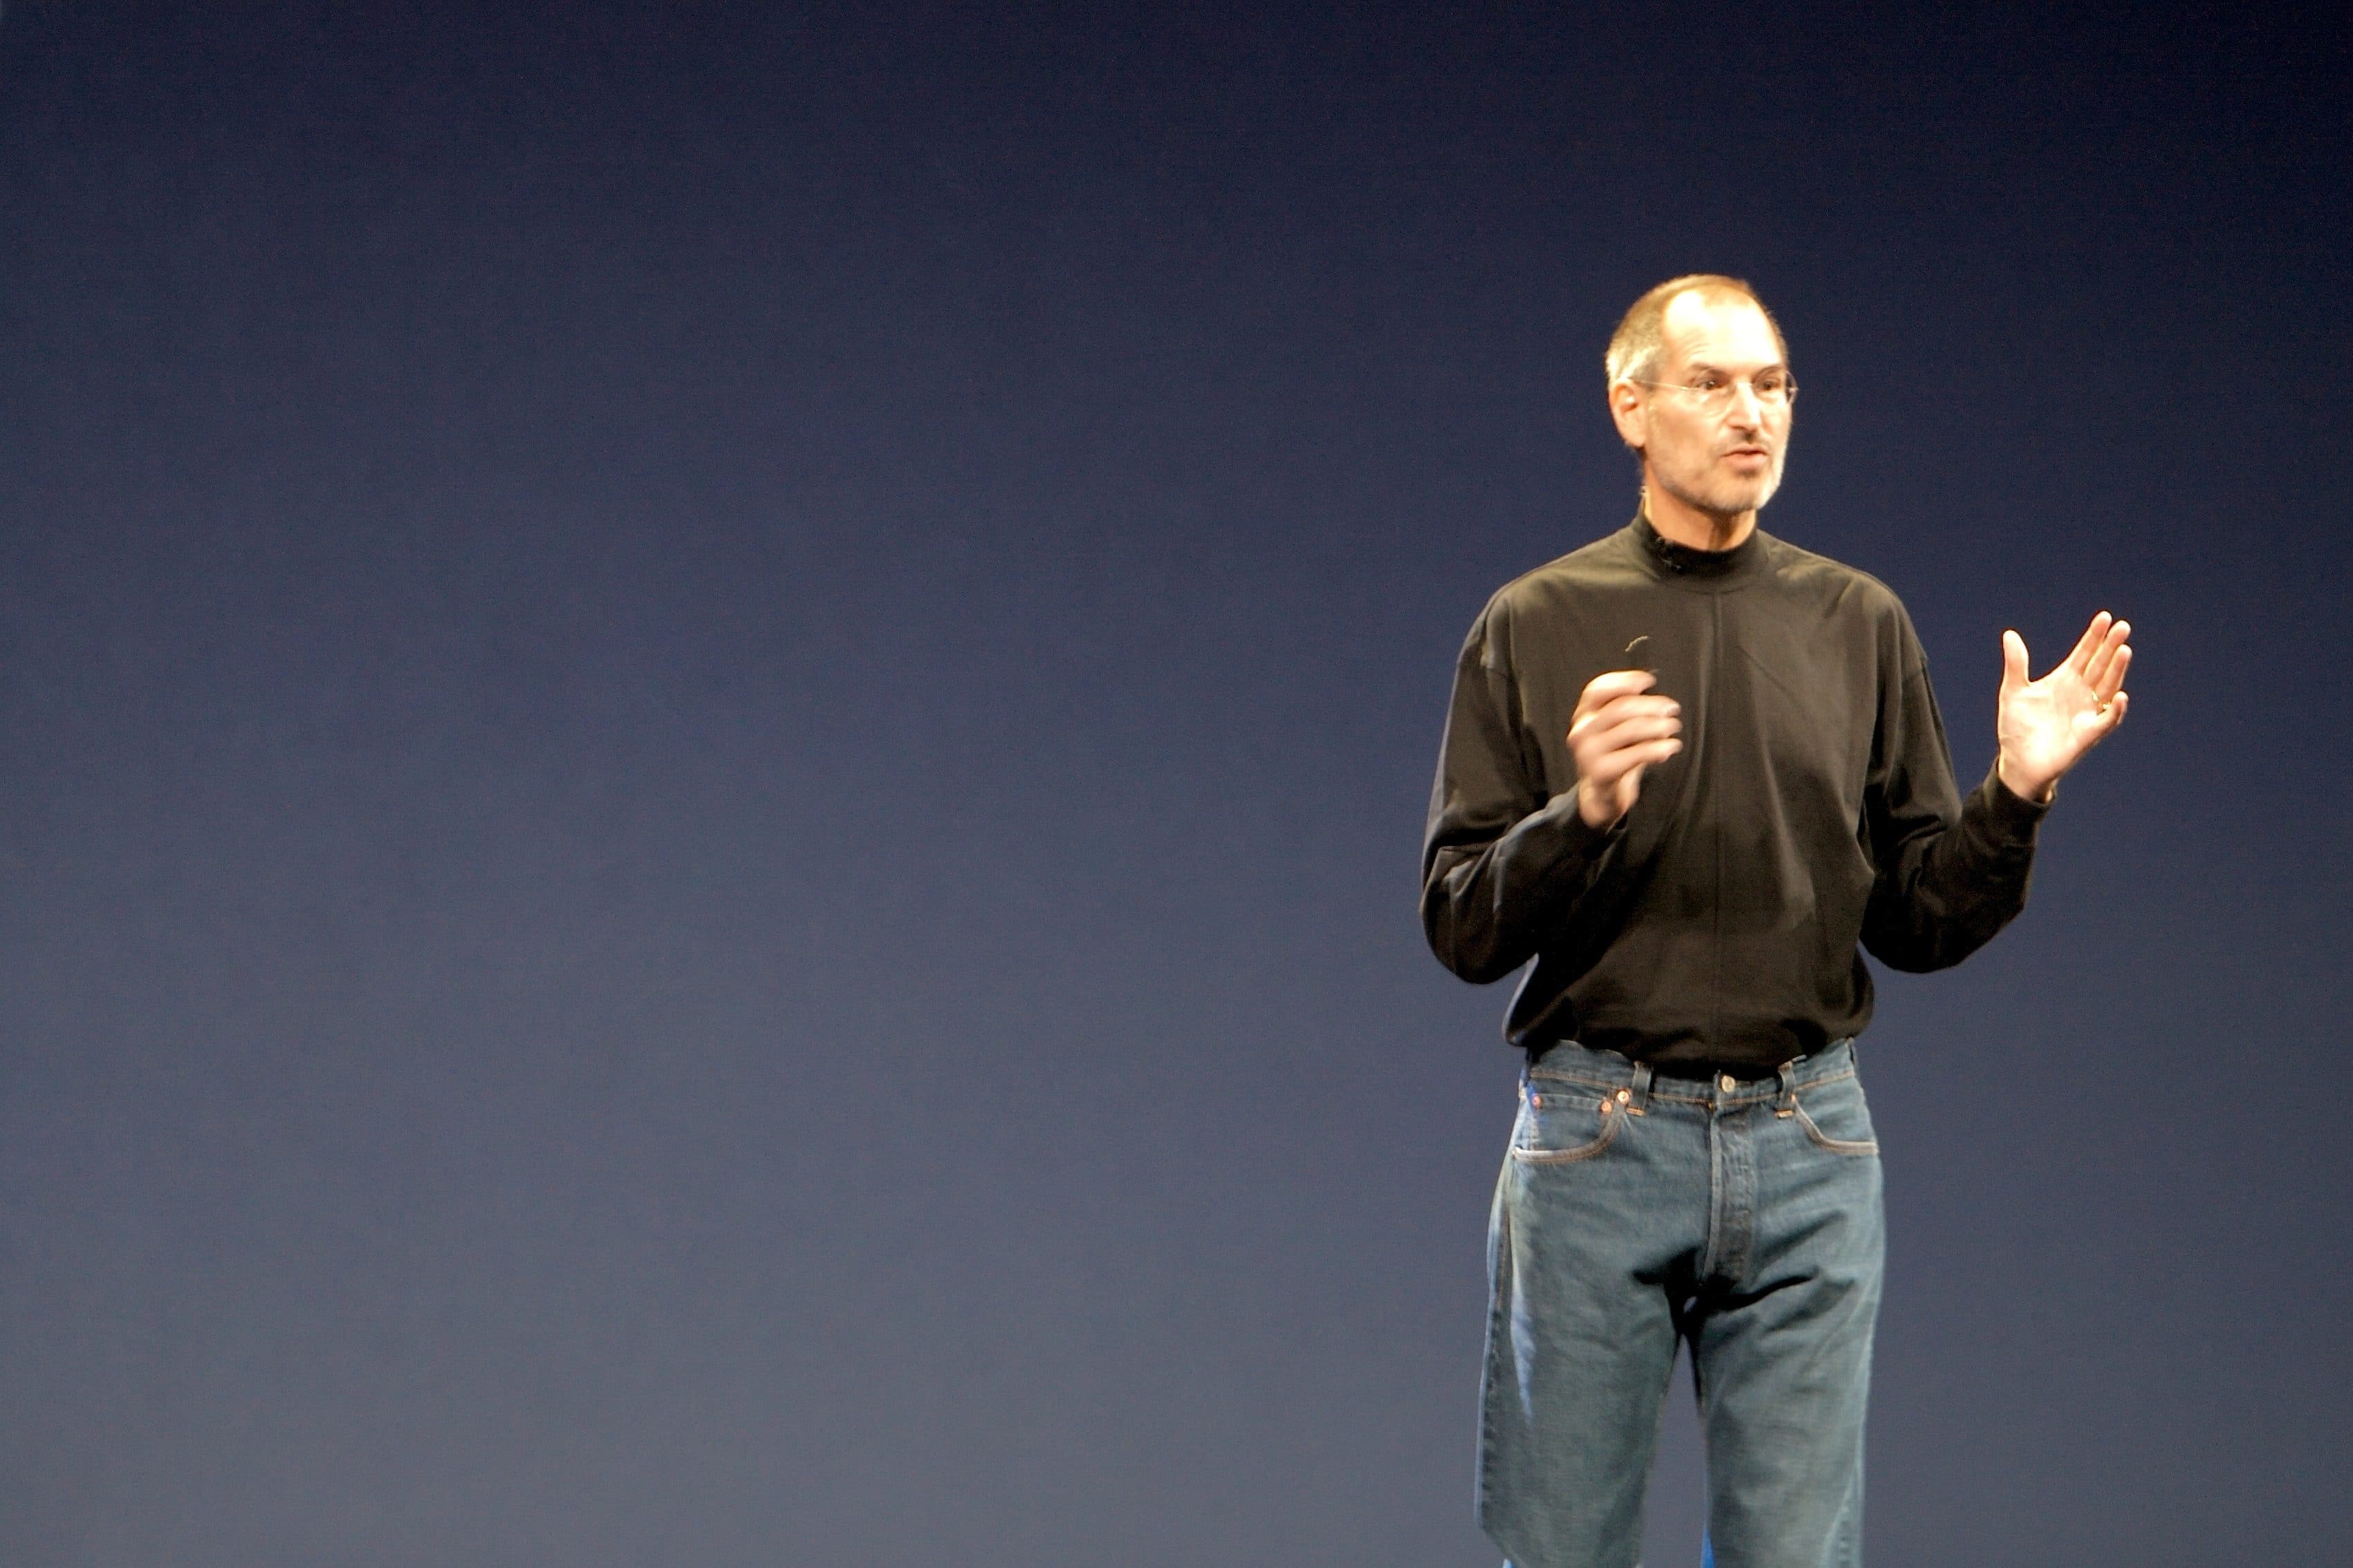 Steve Jobs gives a presentation while wearing a black turtleneck on stage.